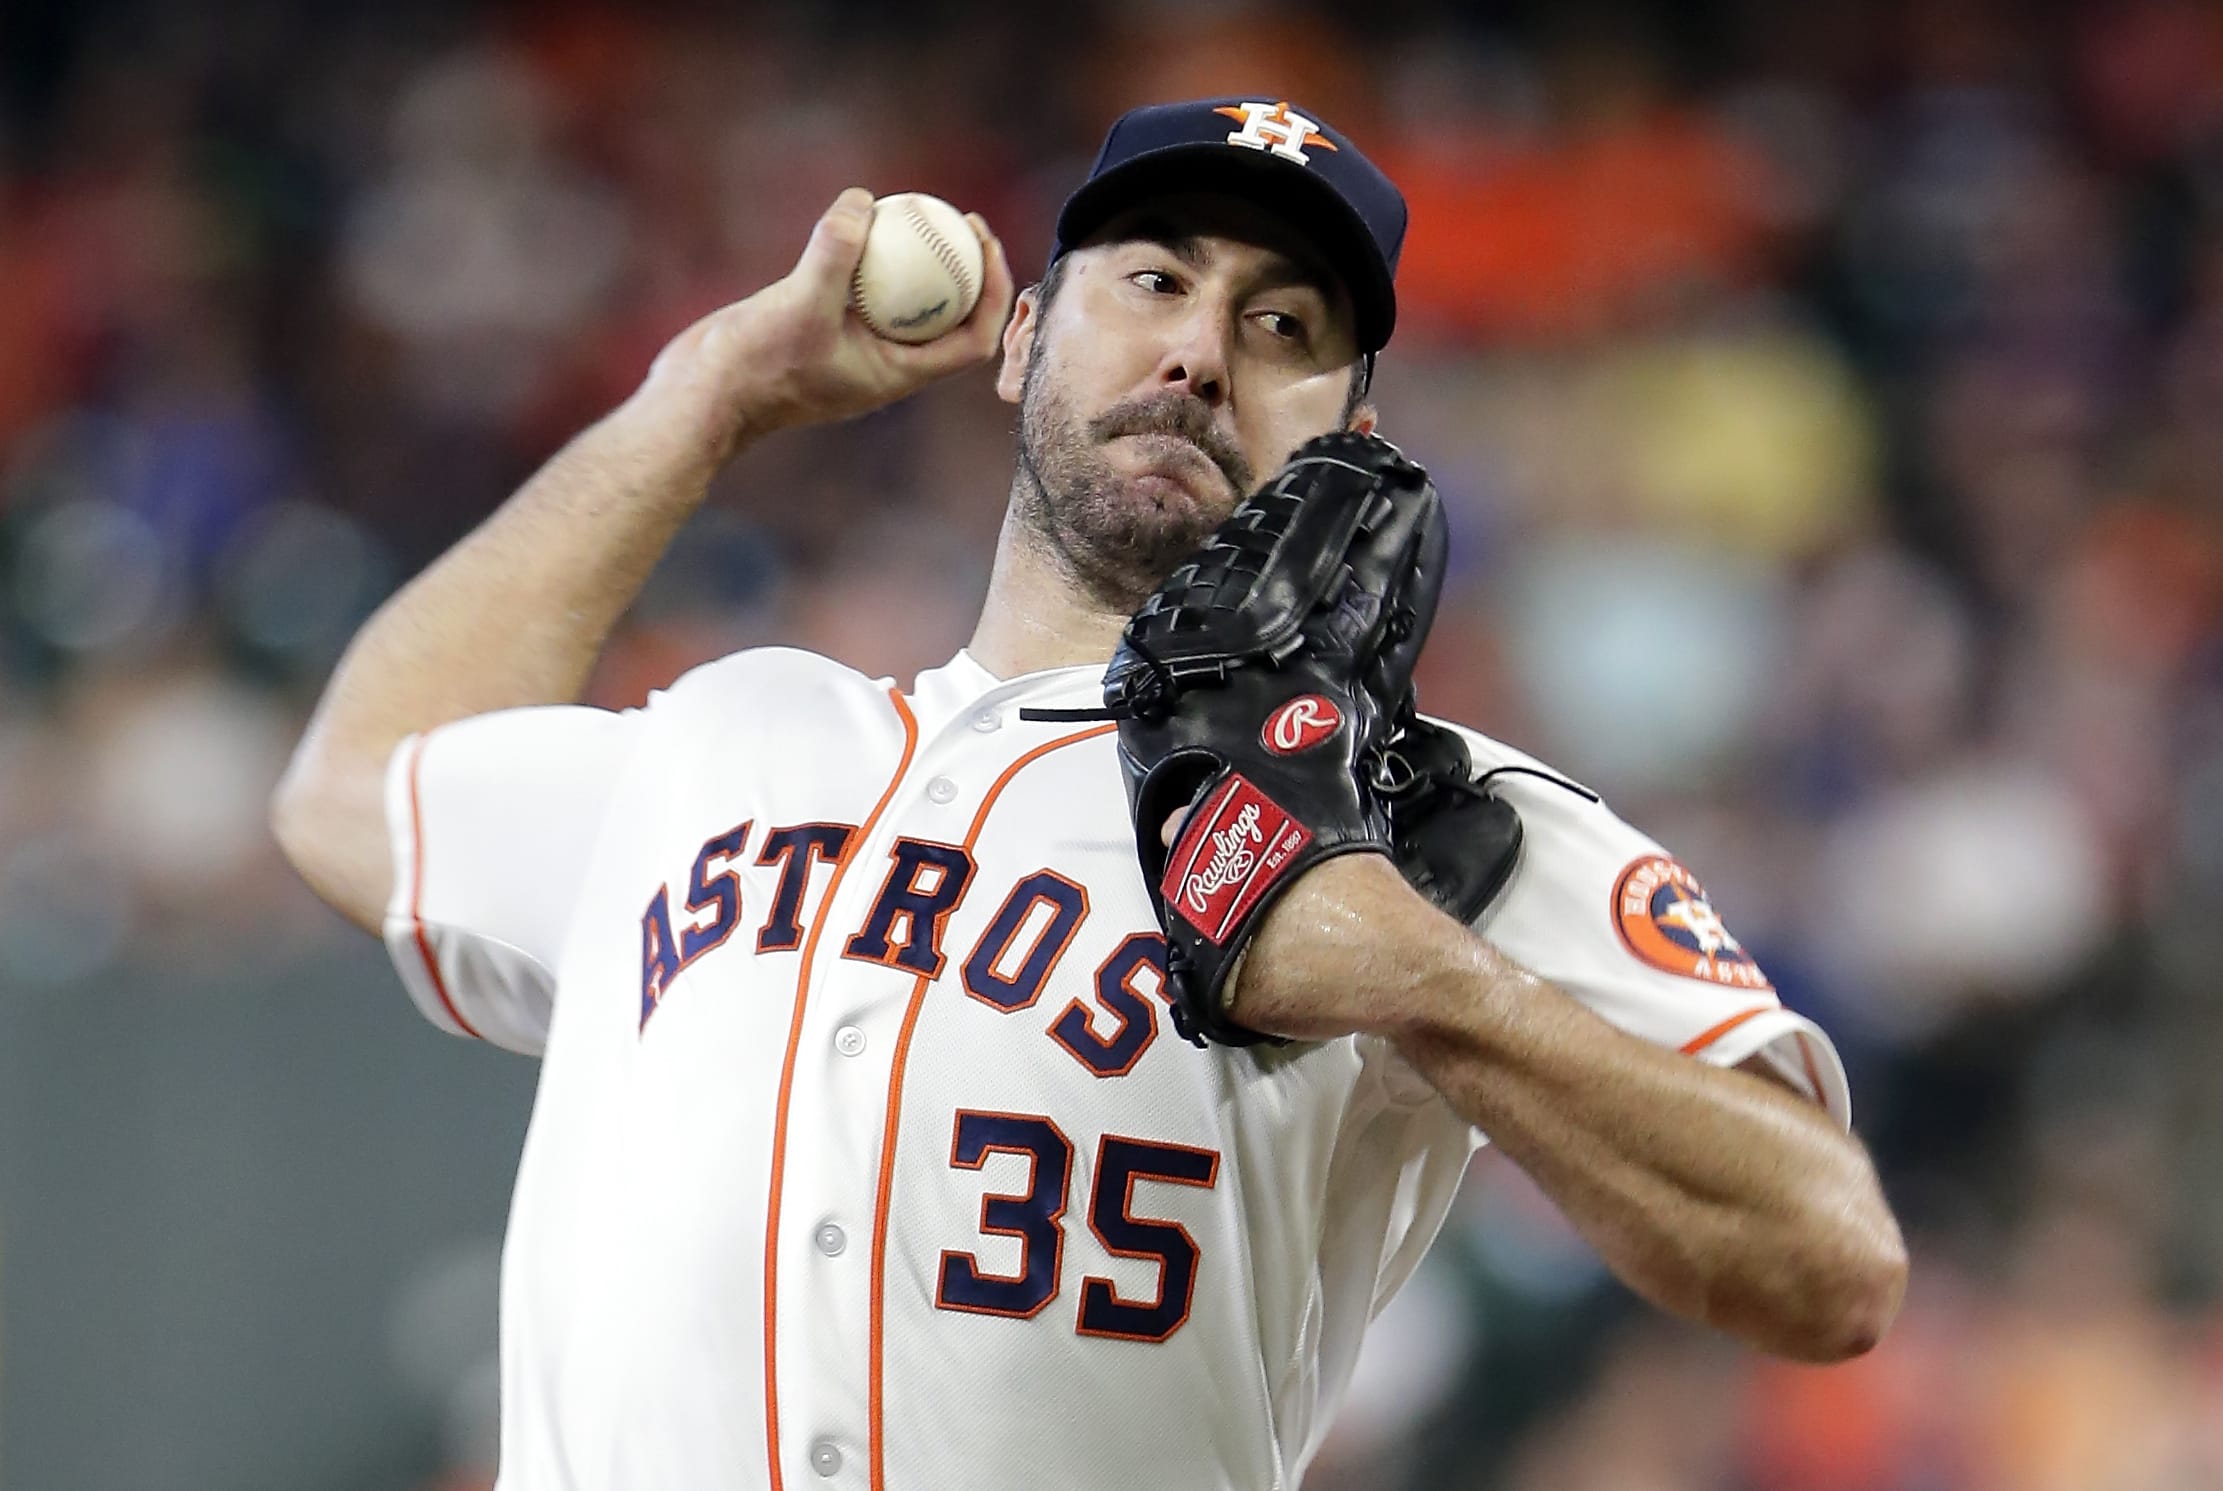 Houston Astros starting pitcher Justin Verlander has been awarded his second AL Cy Young Award winning in 2019 to go with his 2011 honor.